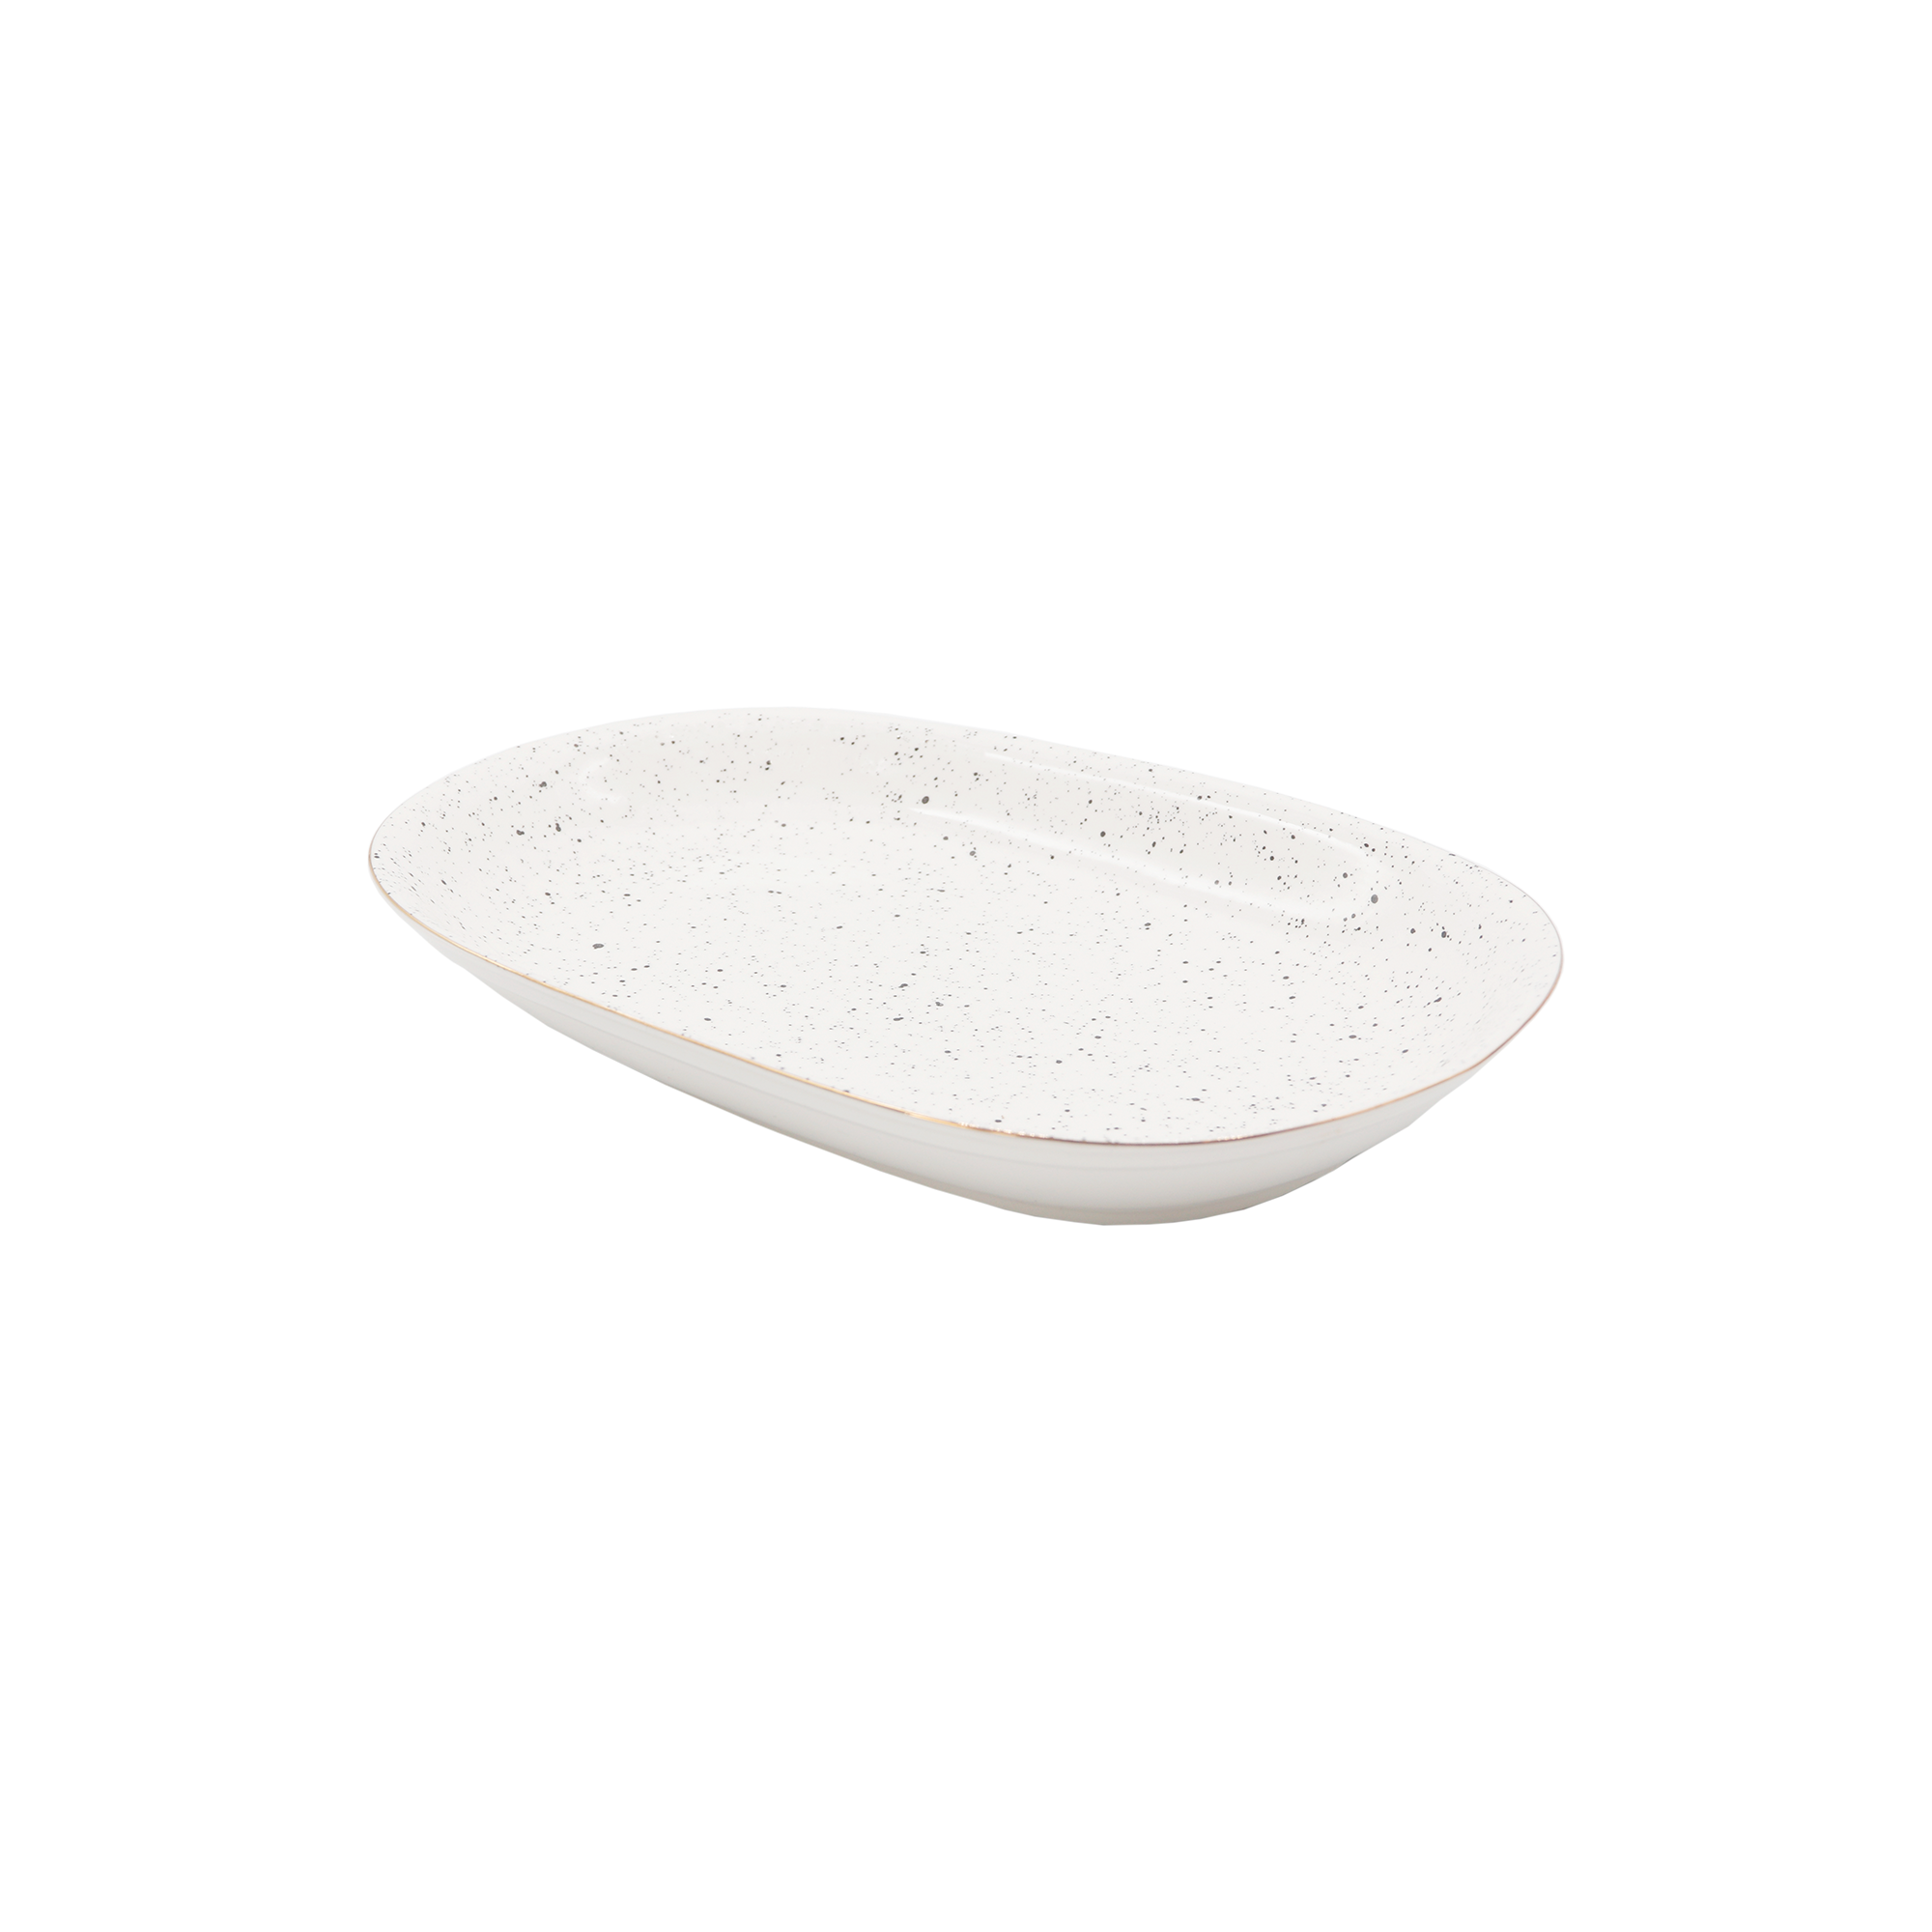 Serving plate 120YP